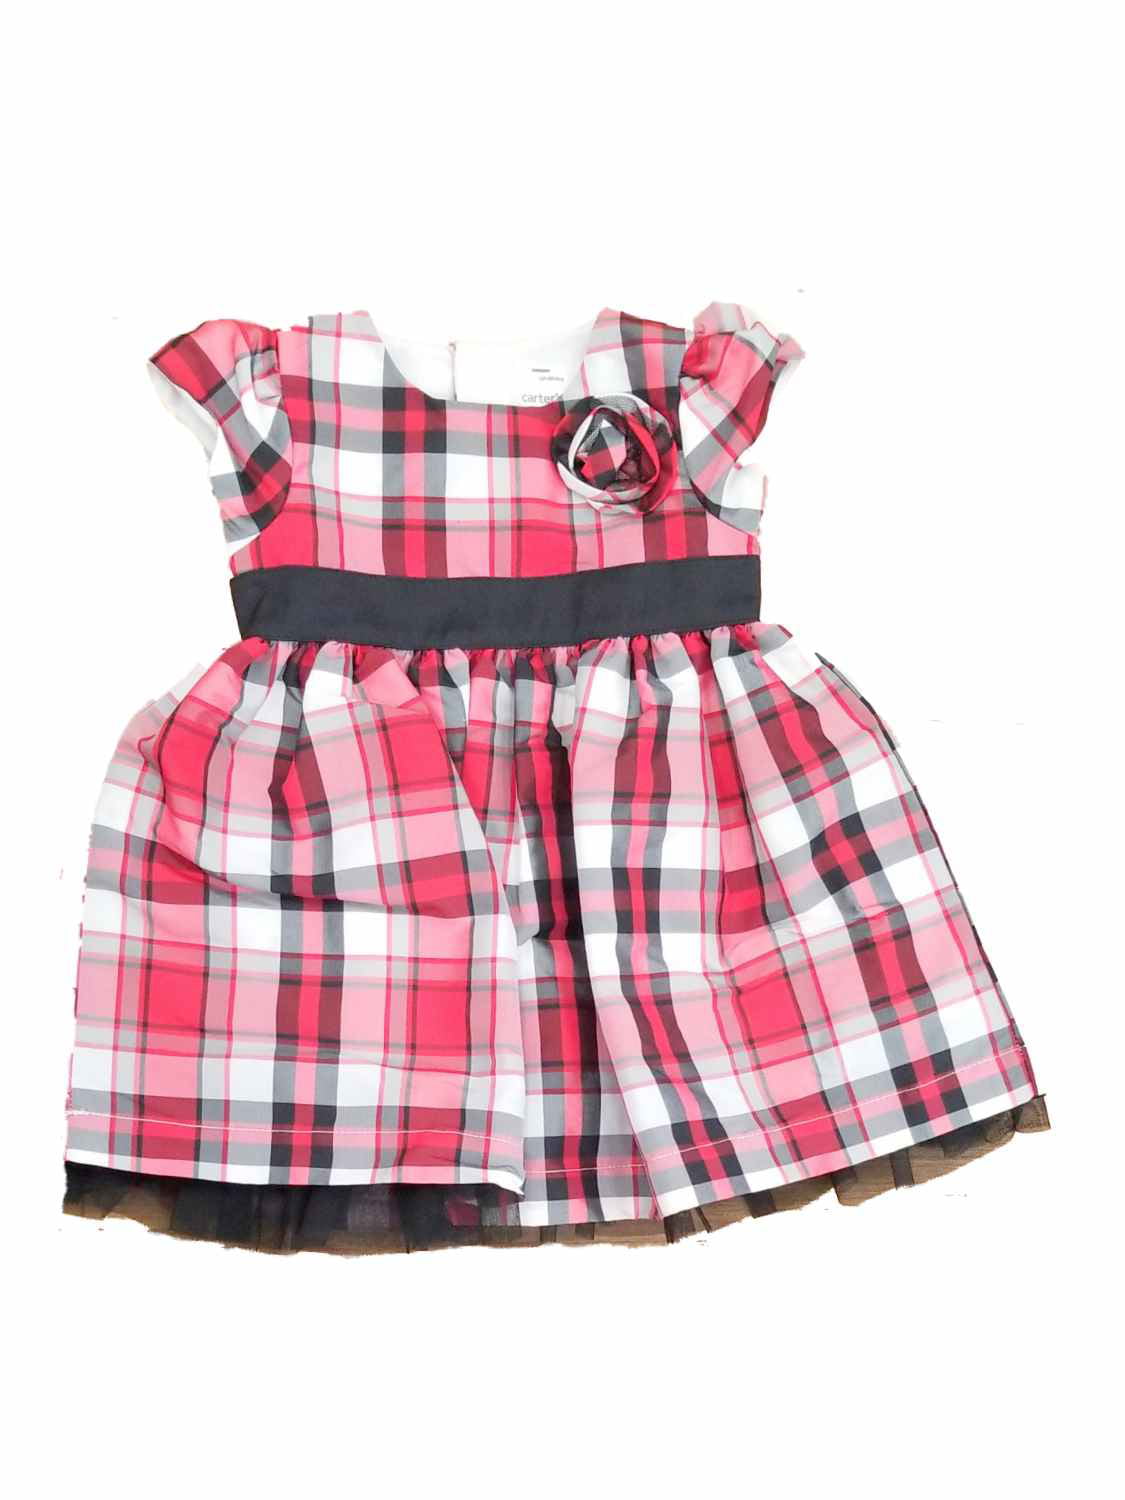 Carters Infant Girls Red Black White Plaid Christmas Holiday Party Dress 6M